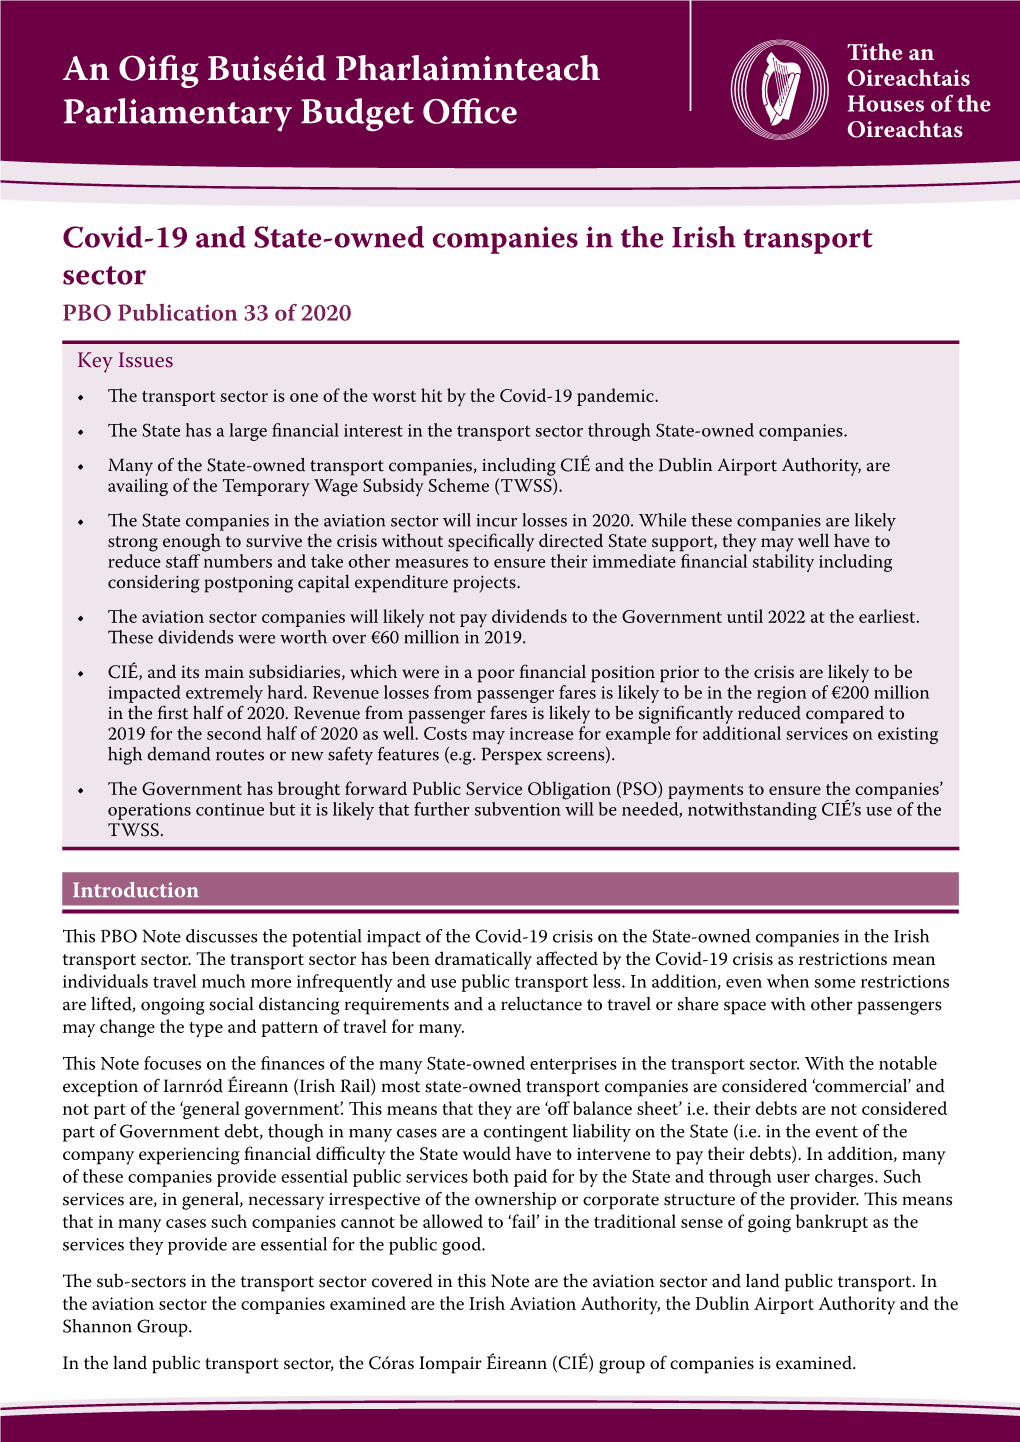 Covid-19 and State-Owned Companies in the Irish Transport Sector